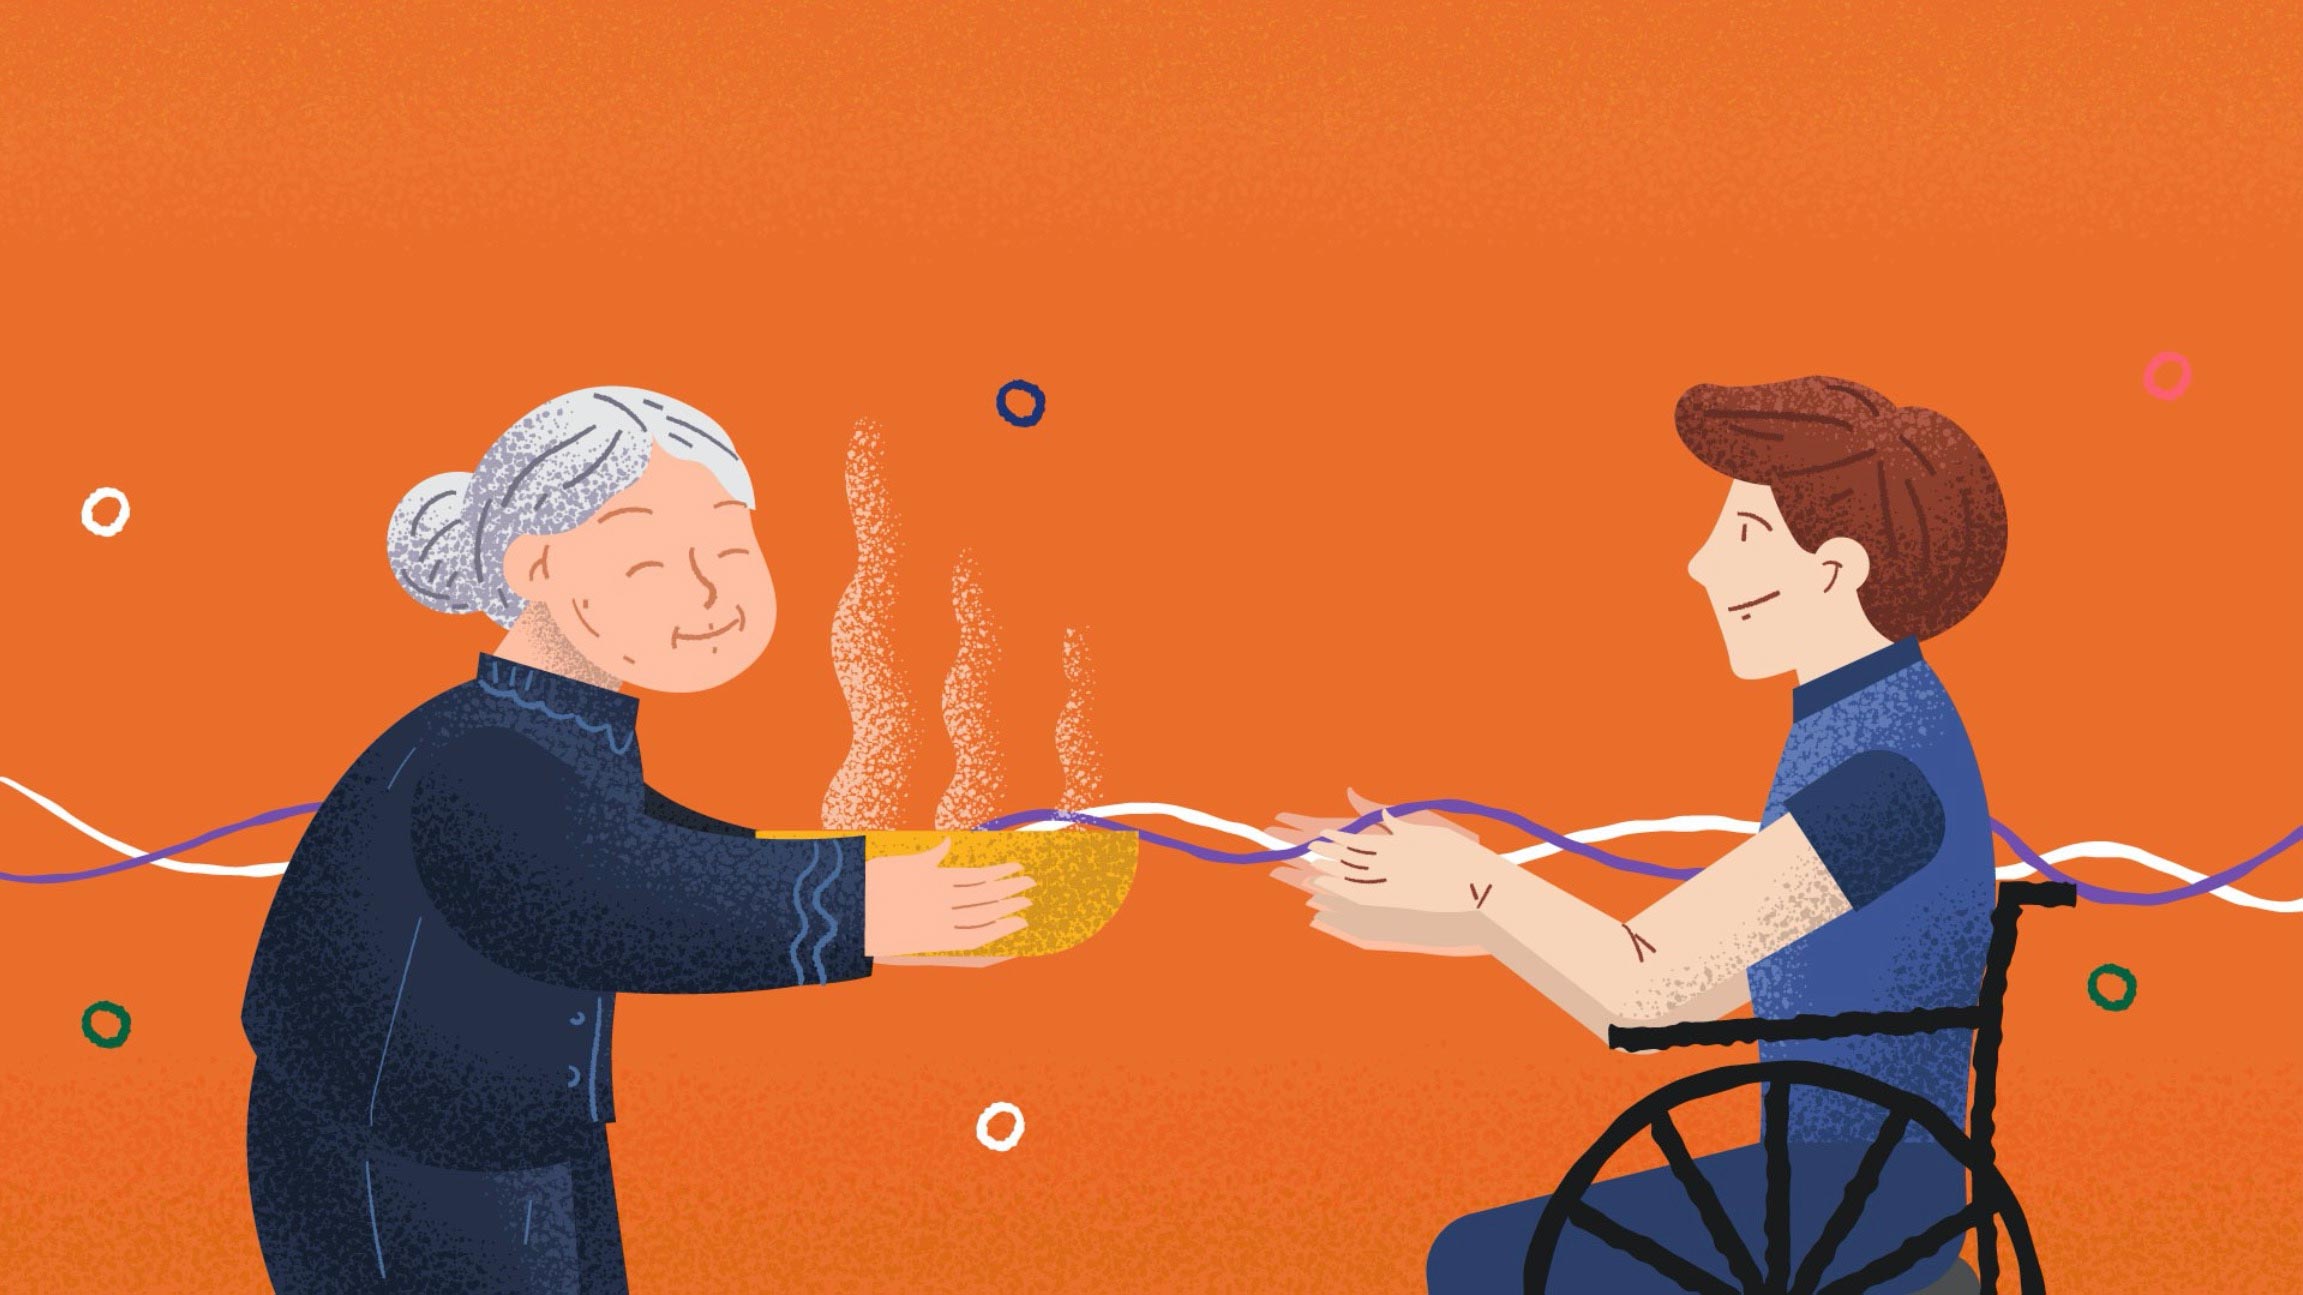  Illustration of an older woman handing a bowl of food to a man in a wheelchair 